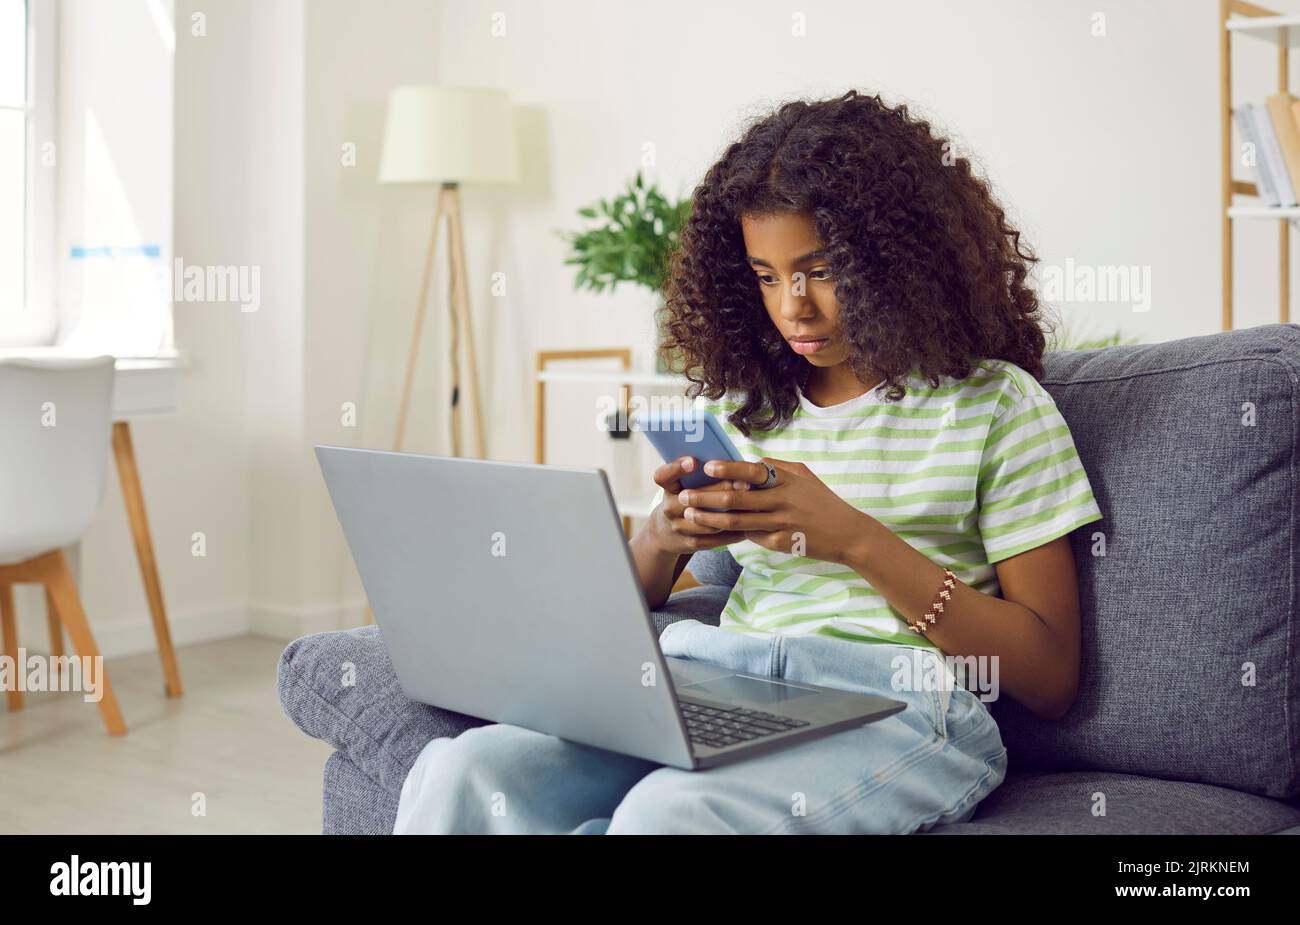 Young ethnic African American girl teenager uses laptop and phone at same time, sits on sofa at home Stock Photo